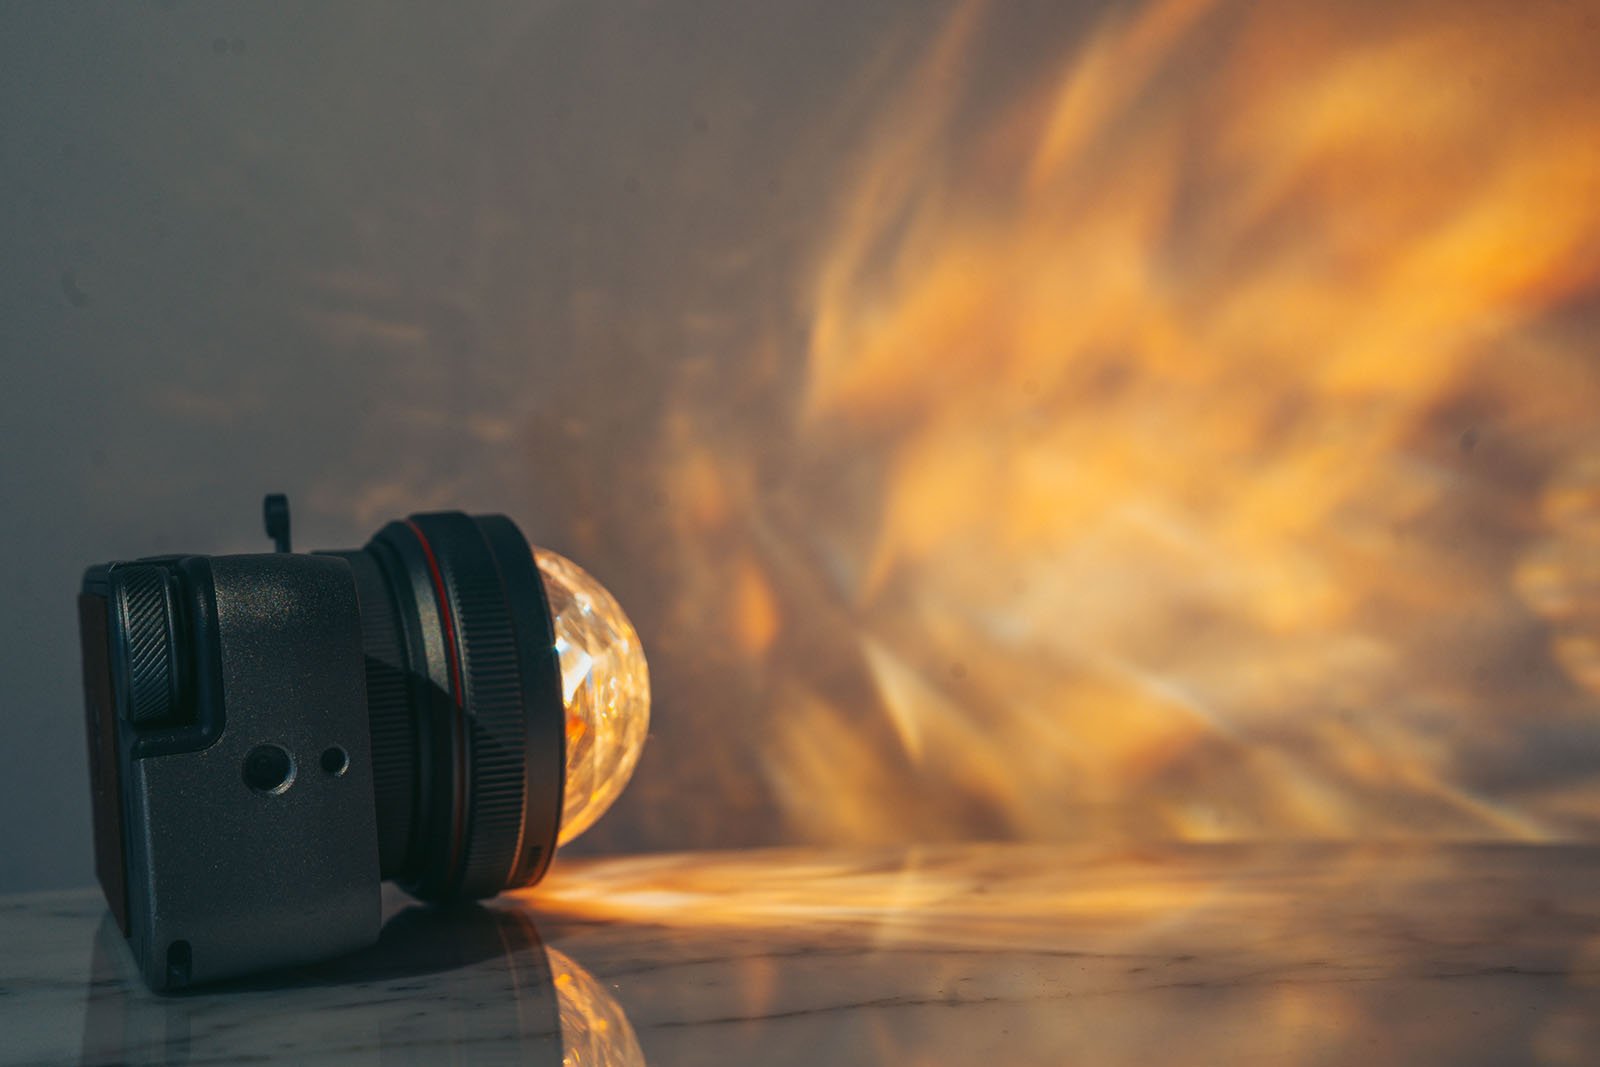 A vintage black camera with a large spherical lens attachment is placed on a marble surface. The lens projects an array of diffused, warm-colored light patterns onto the wall in the background, creating a visually striking effect.